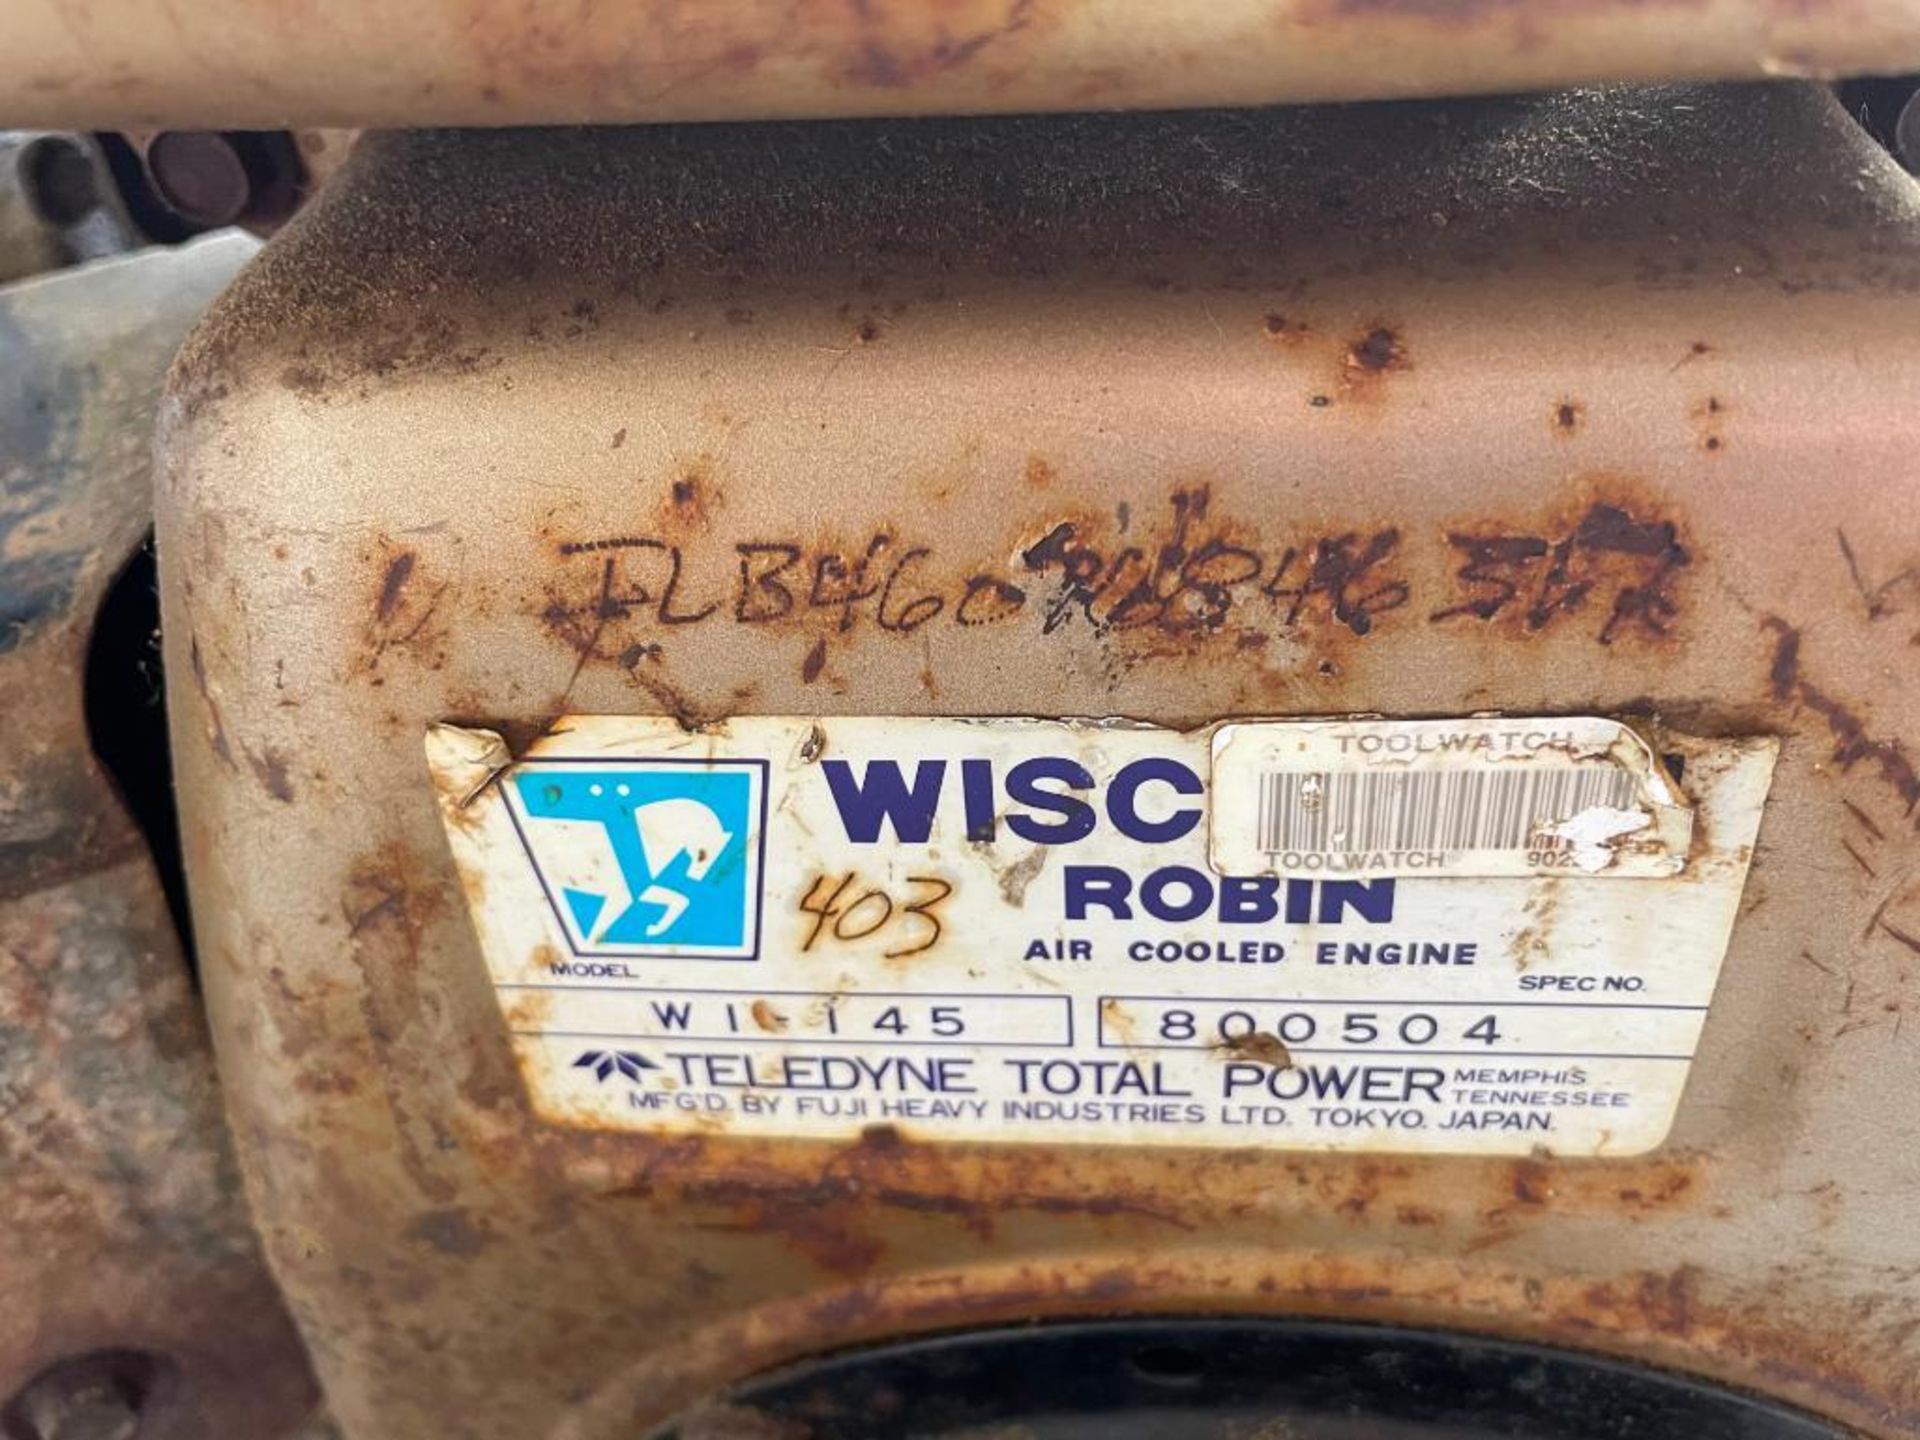 (1) Centrifugal Pump with Wisconsin Robin Air Cooled Engine. Located in Waukegan, IL. - Image 7 of 7